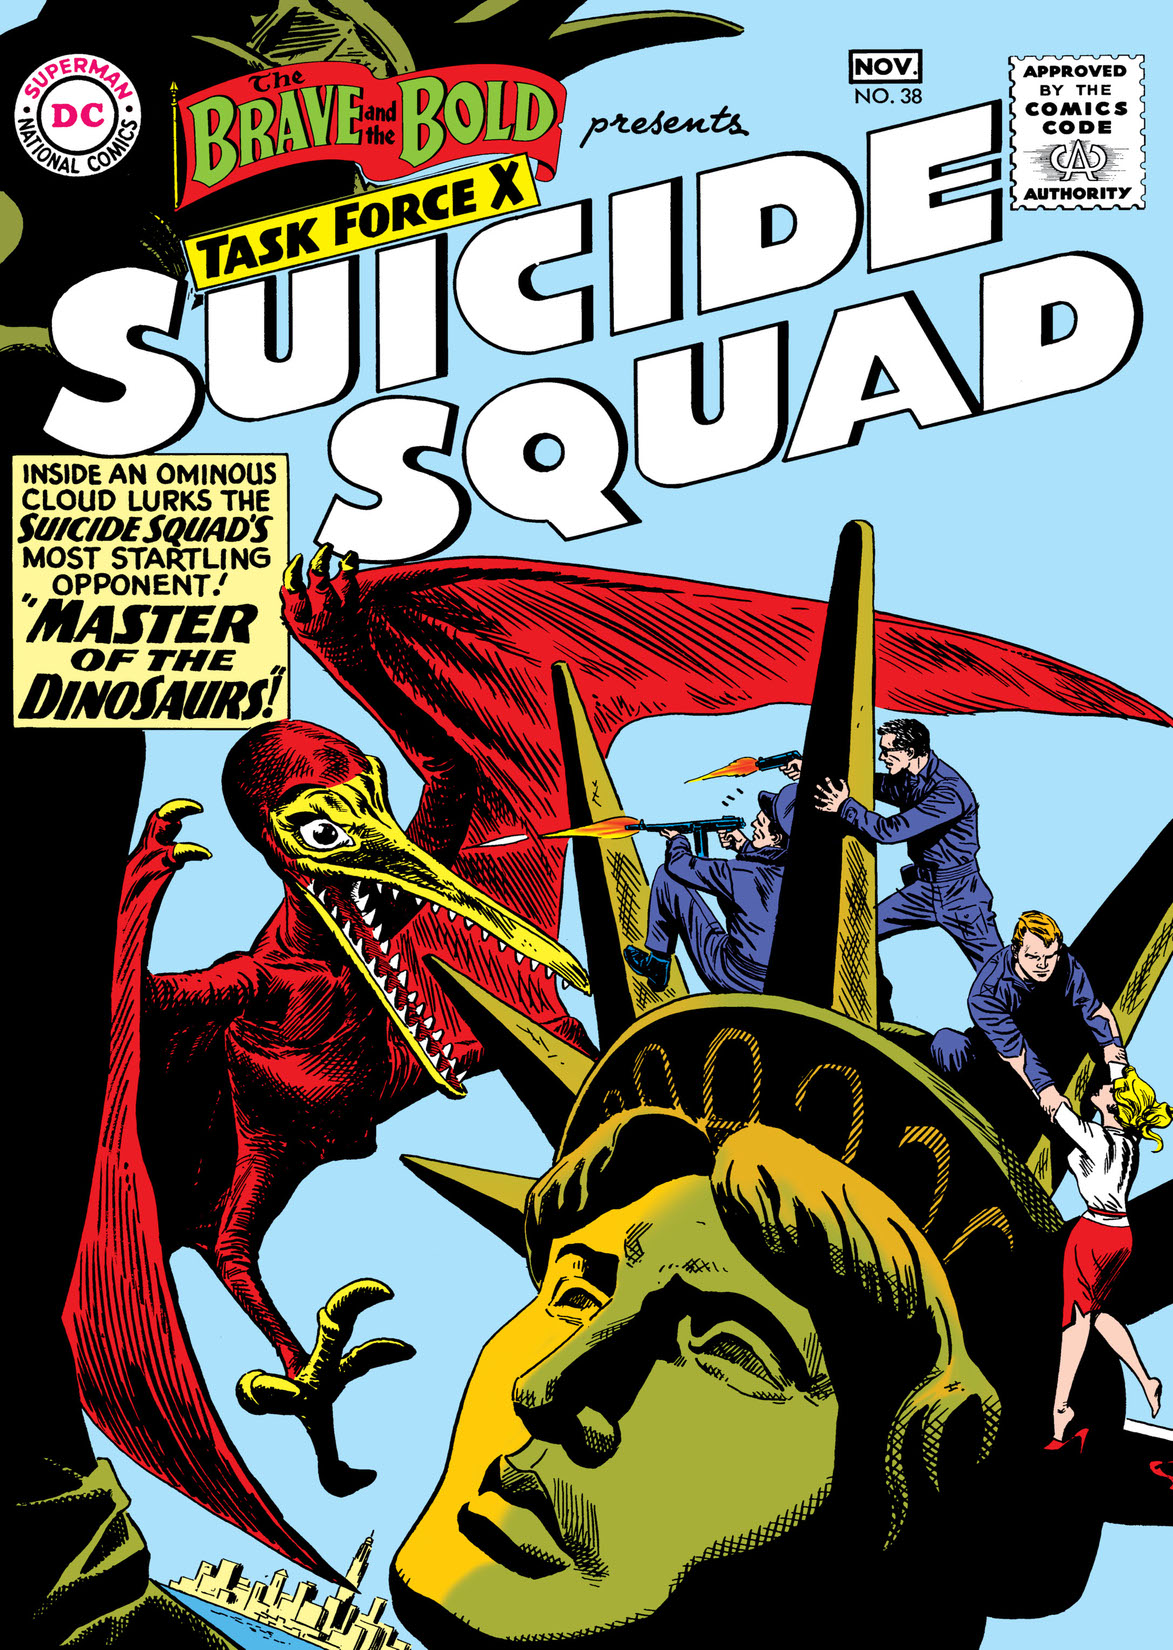 The Brave and the Bold (1955-) #38 preview images